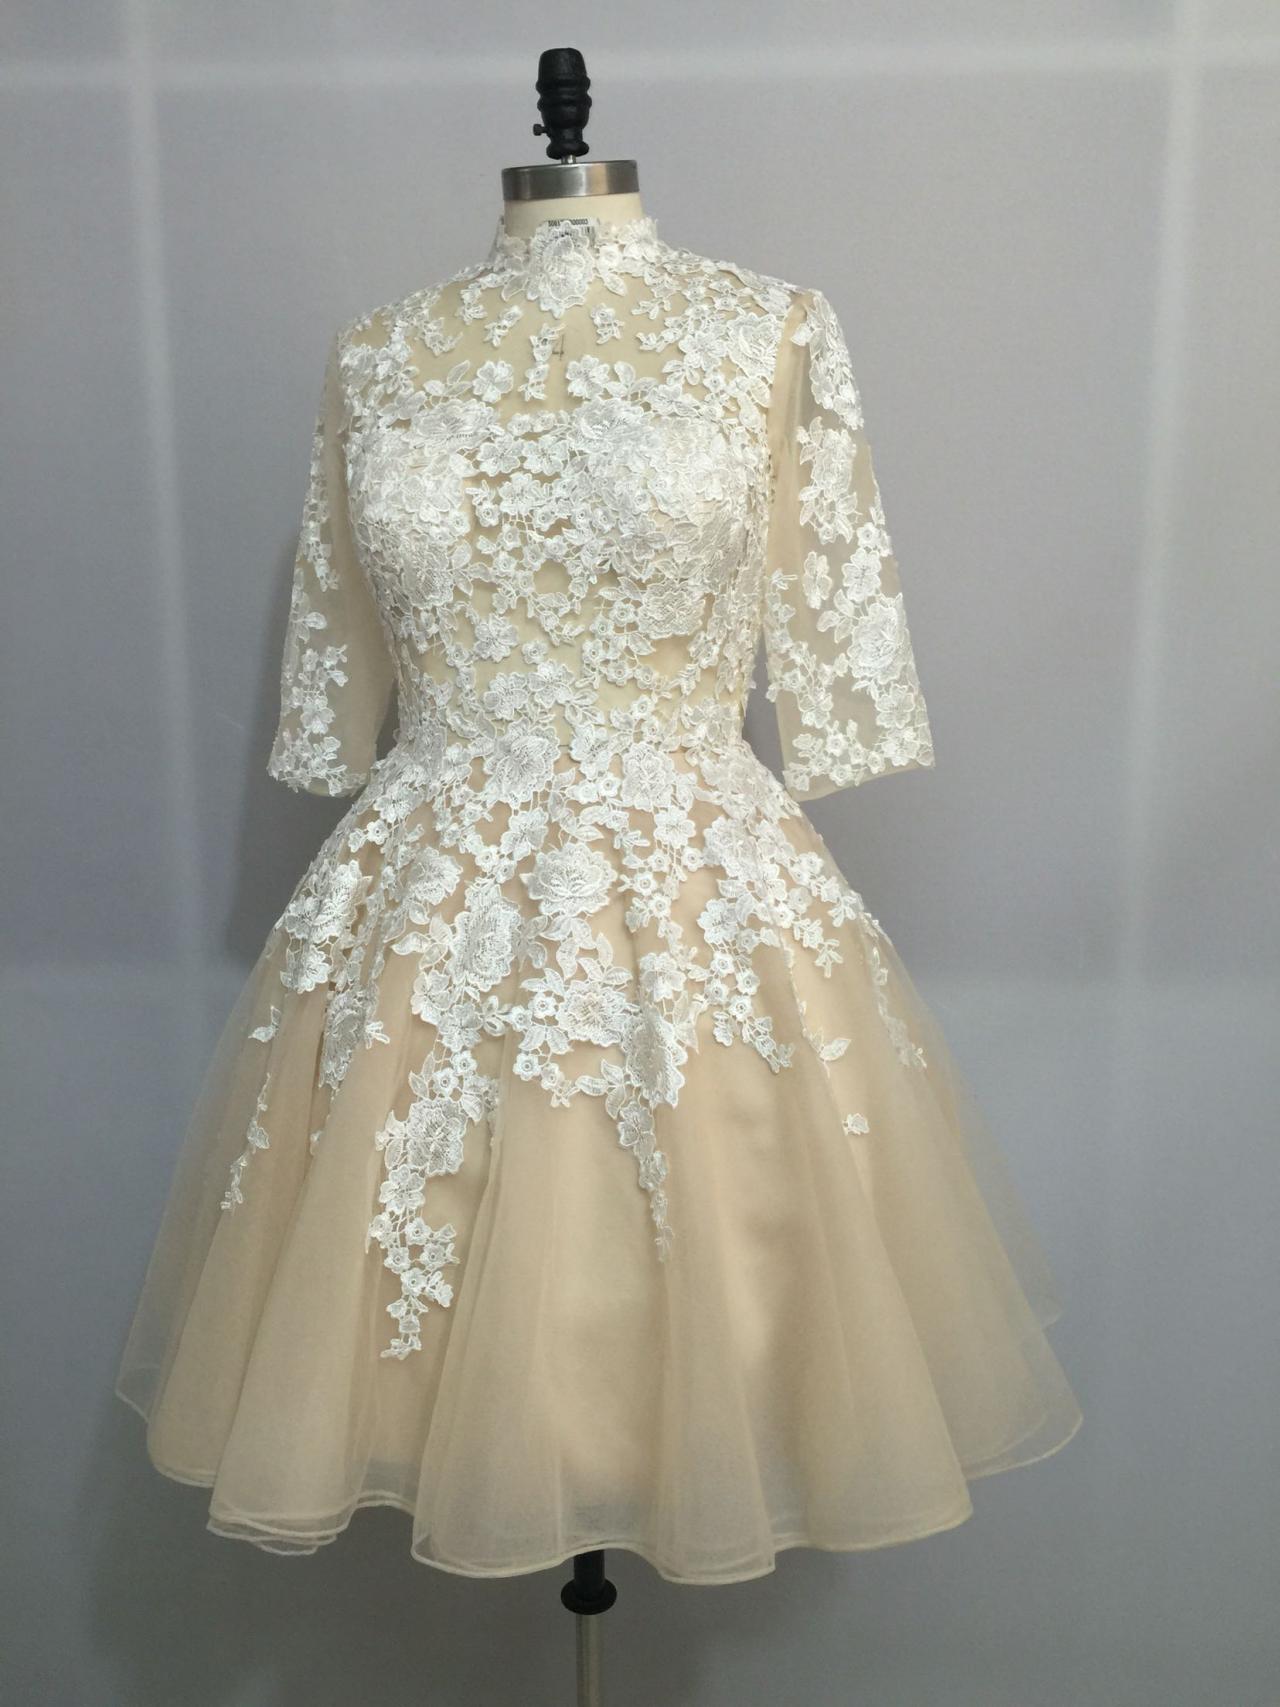 Lace Applique With Tulle Short Formal Dresses, Lovely Party Dresses, Sweet Dresses